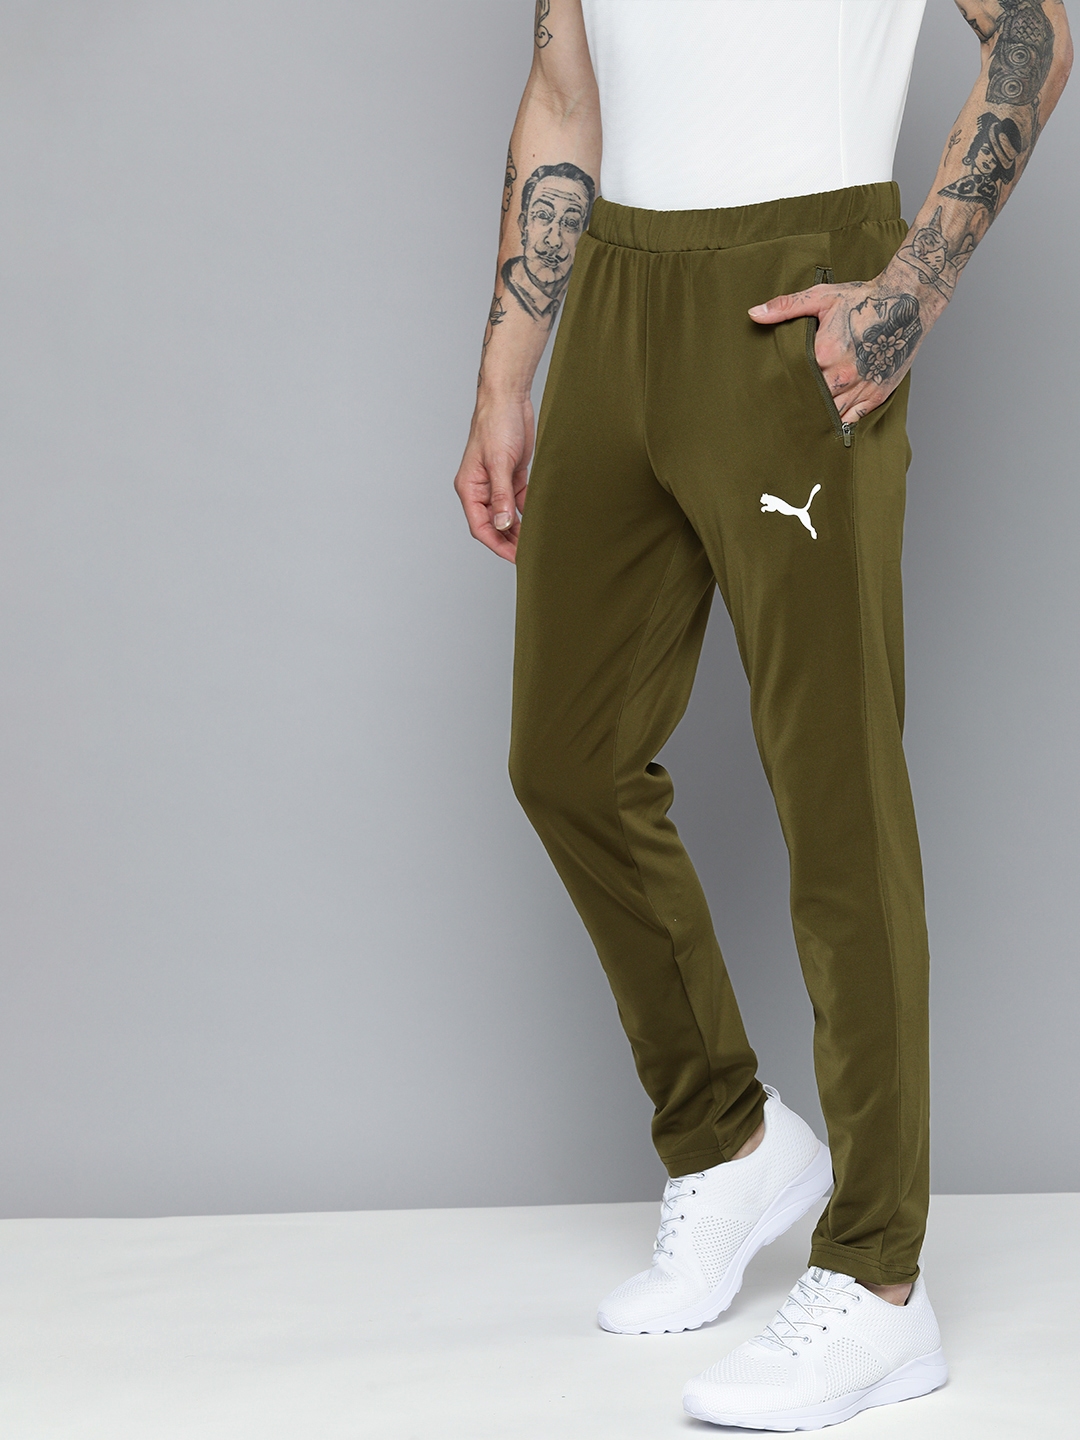 Buy Vk One8 Knitted Black Track Pants - Track Pants for Men 7634670 | Myntra